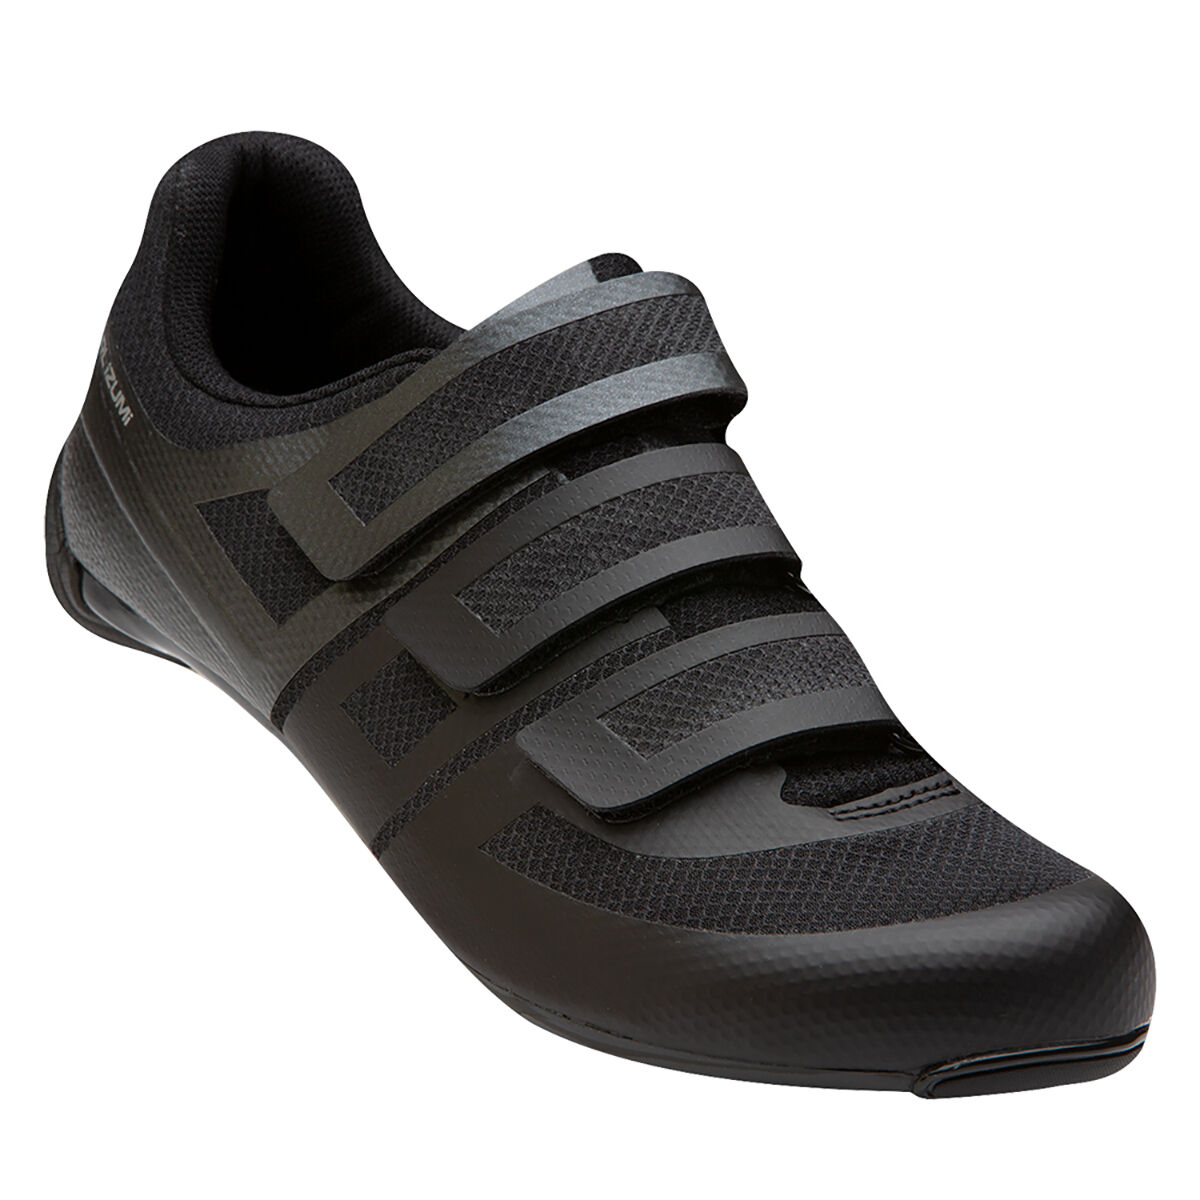 Pearl Izumi Quest Route  - Cycling shoes - Women's